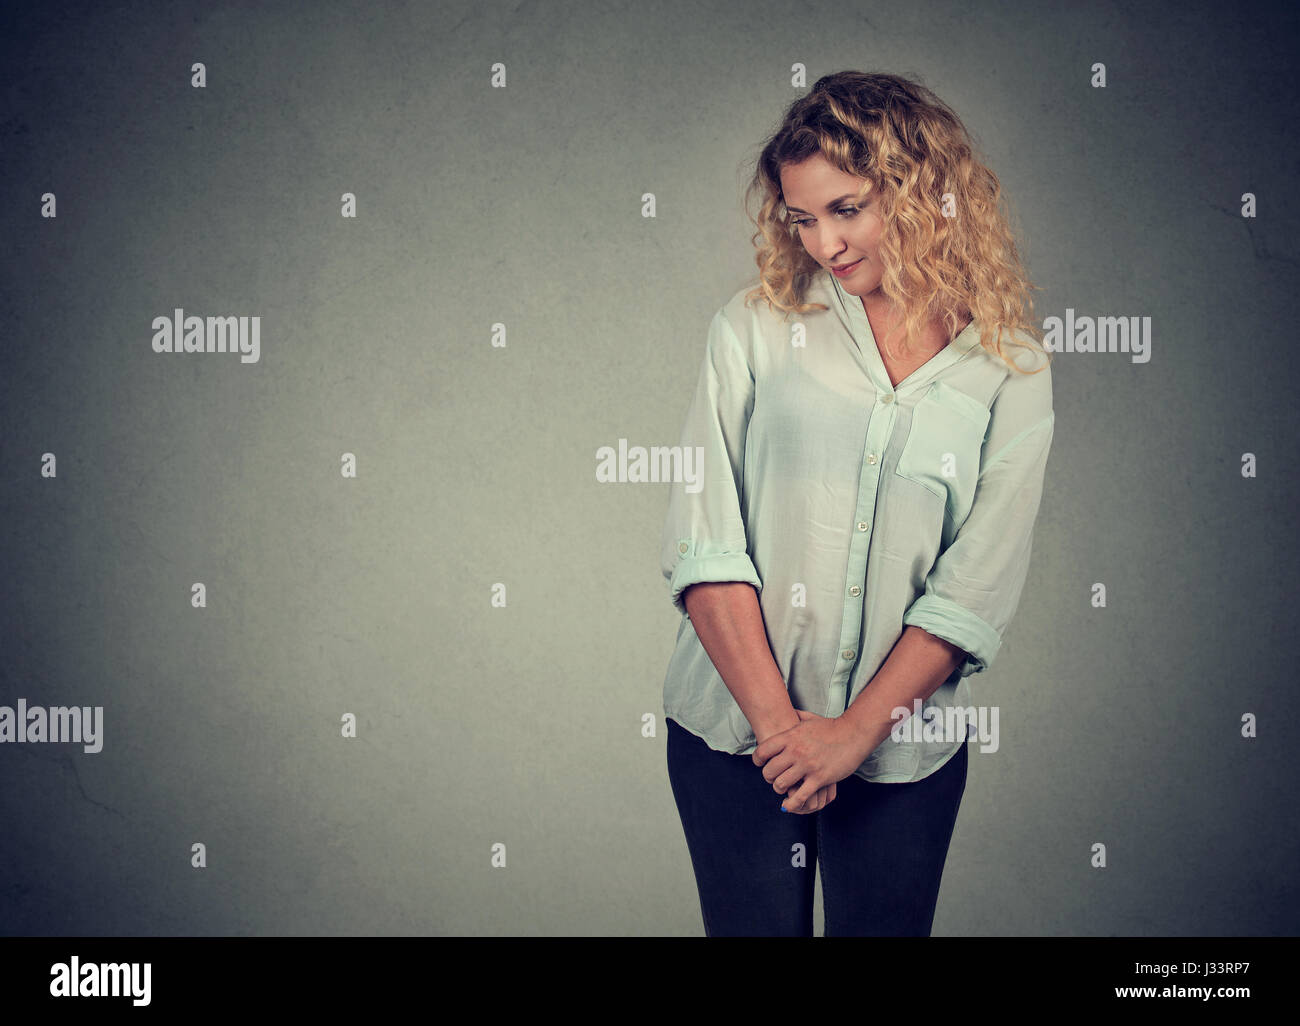 Shy insecure young woman looking down avoiding eye contact standing isolated on gray wall background Stock Photo